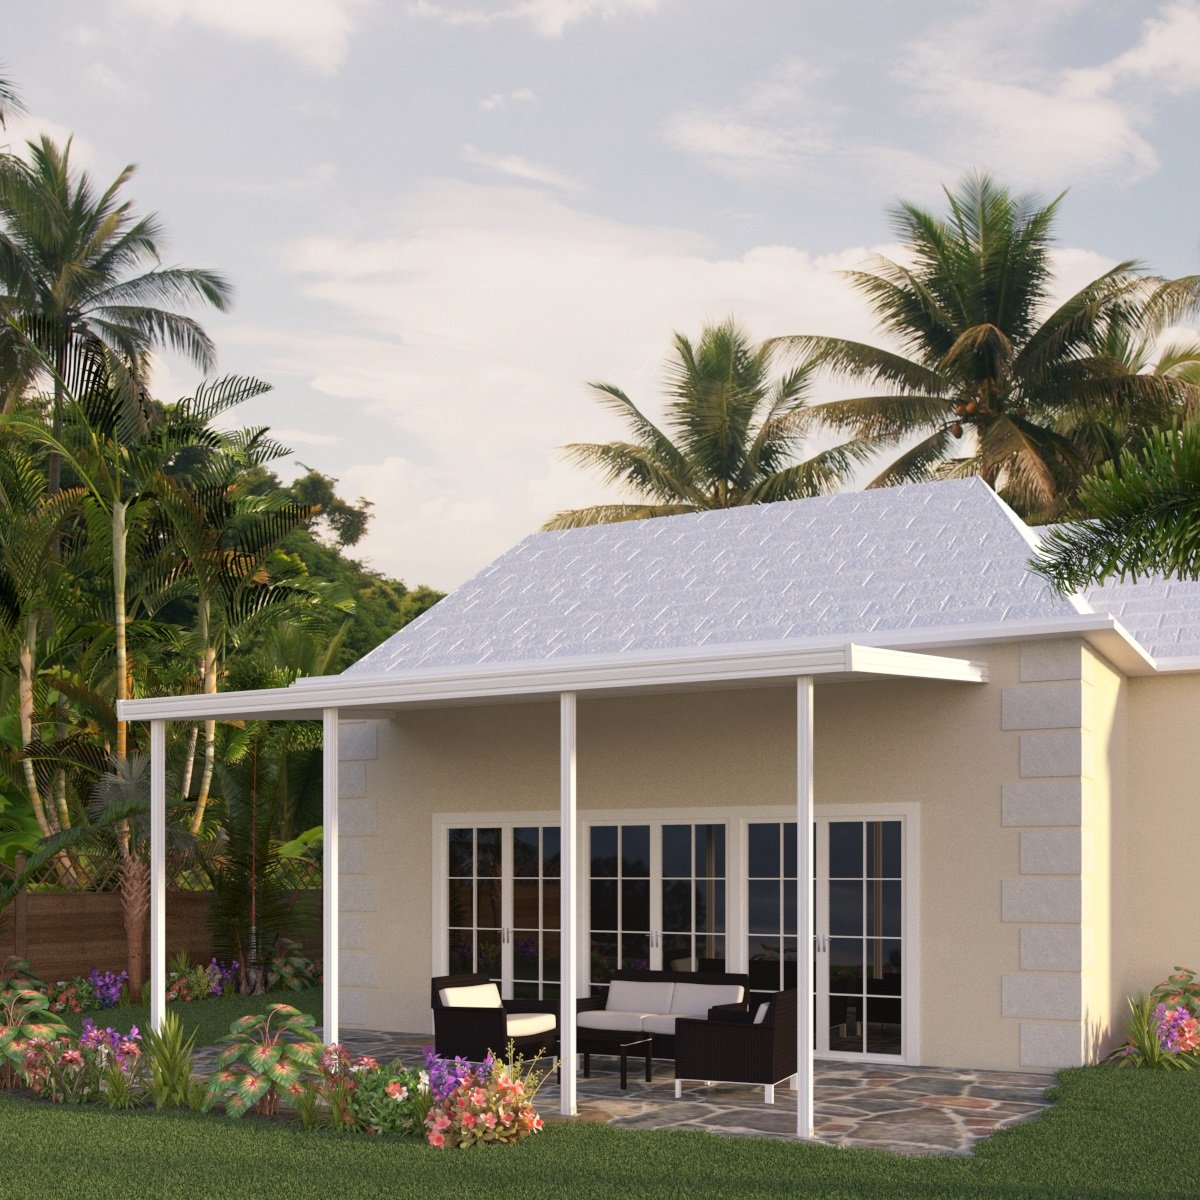 08 ft. Deep x 26 ft. Wide White Attached Aluminum Patio Cover -4 Posts - (20lb Low/Medium Snow Area)